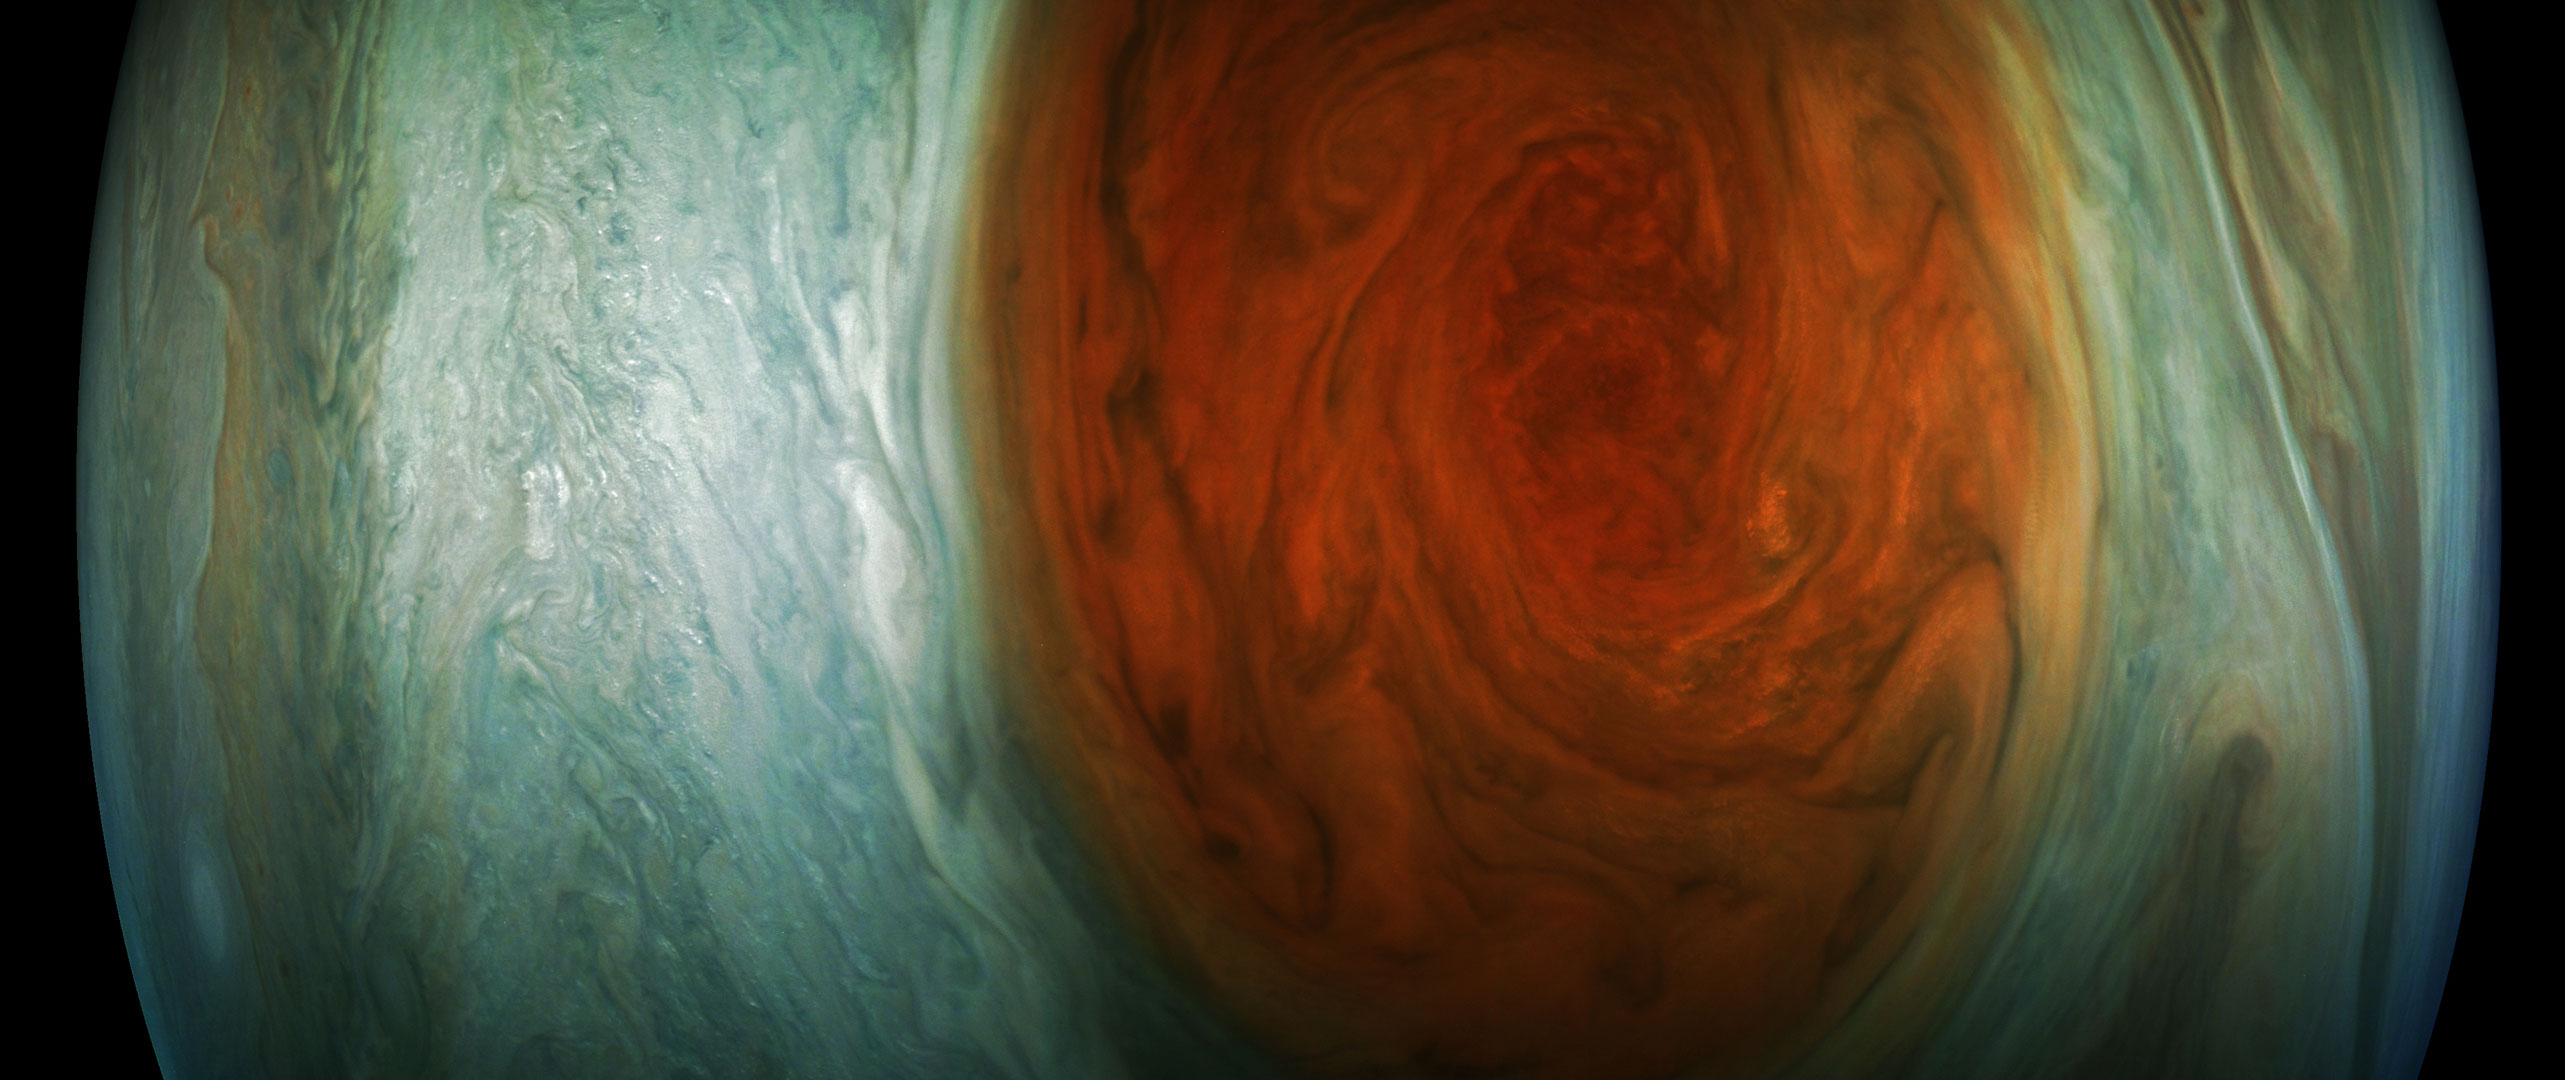 New Images from Juno's Recent Flyby of Jupiter’s Great Red ...